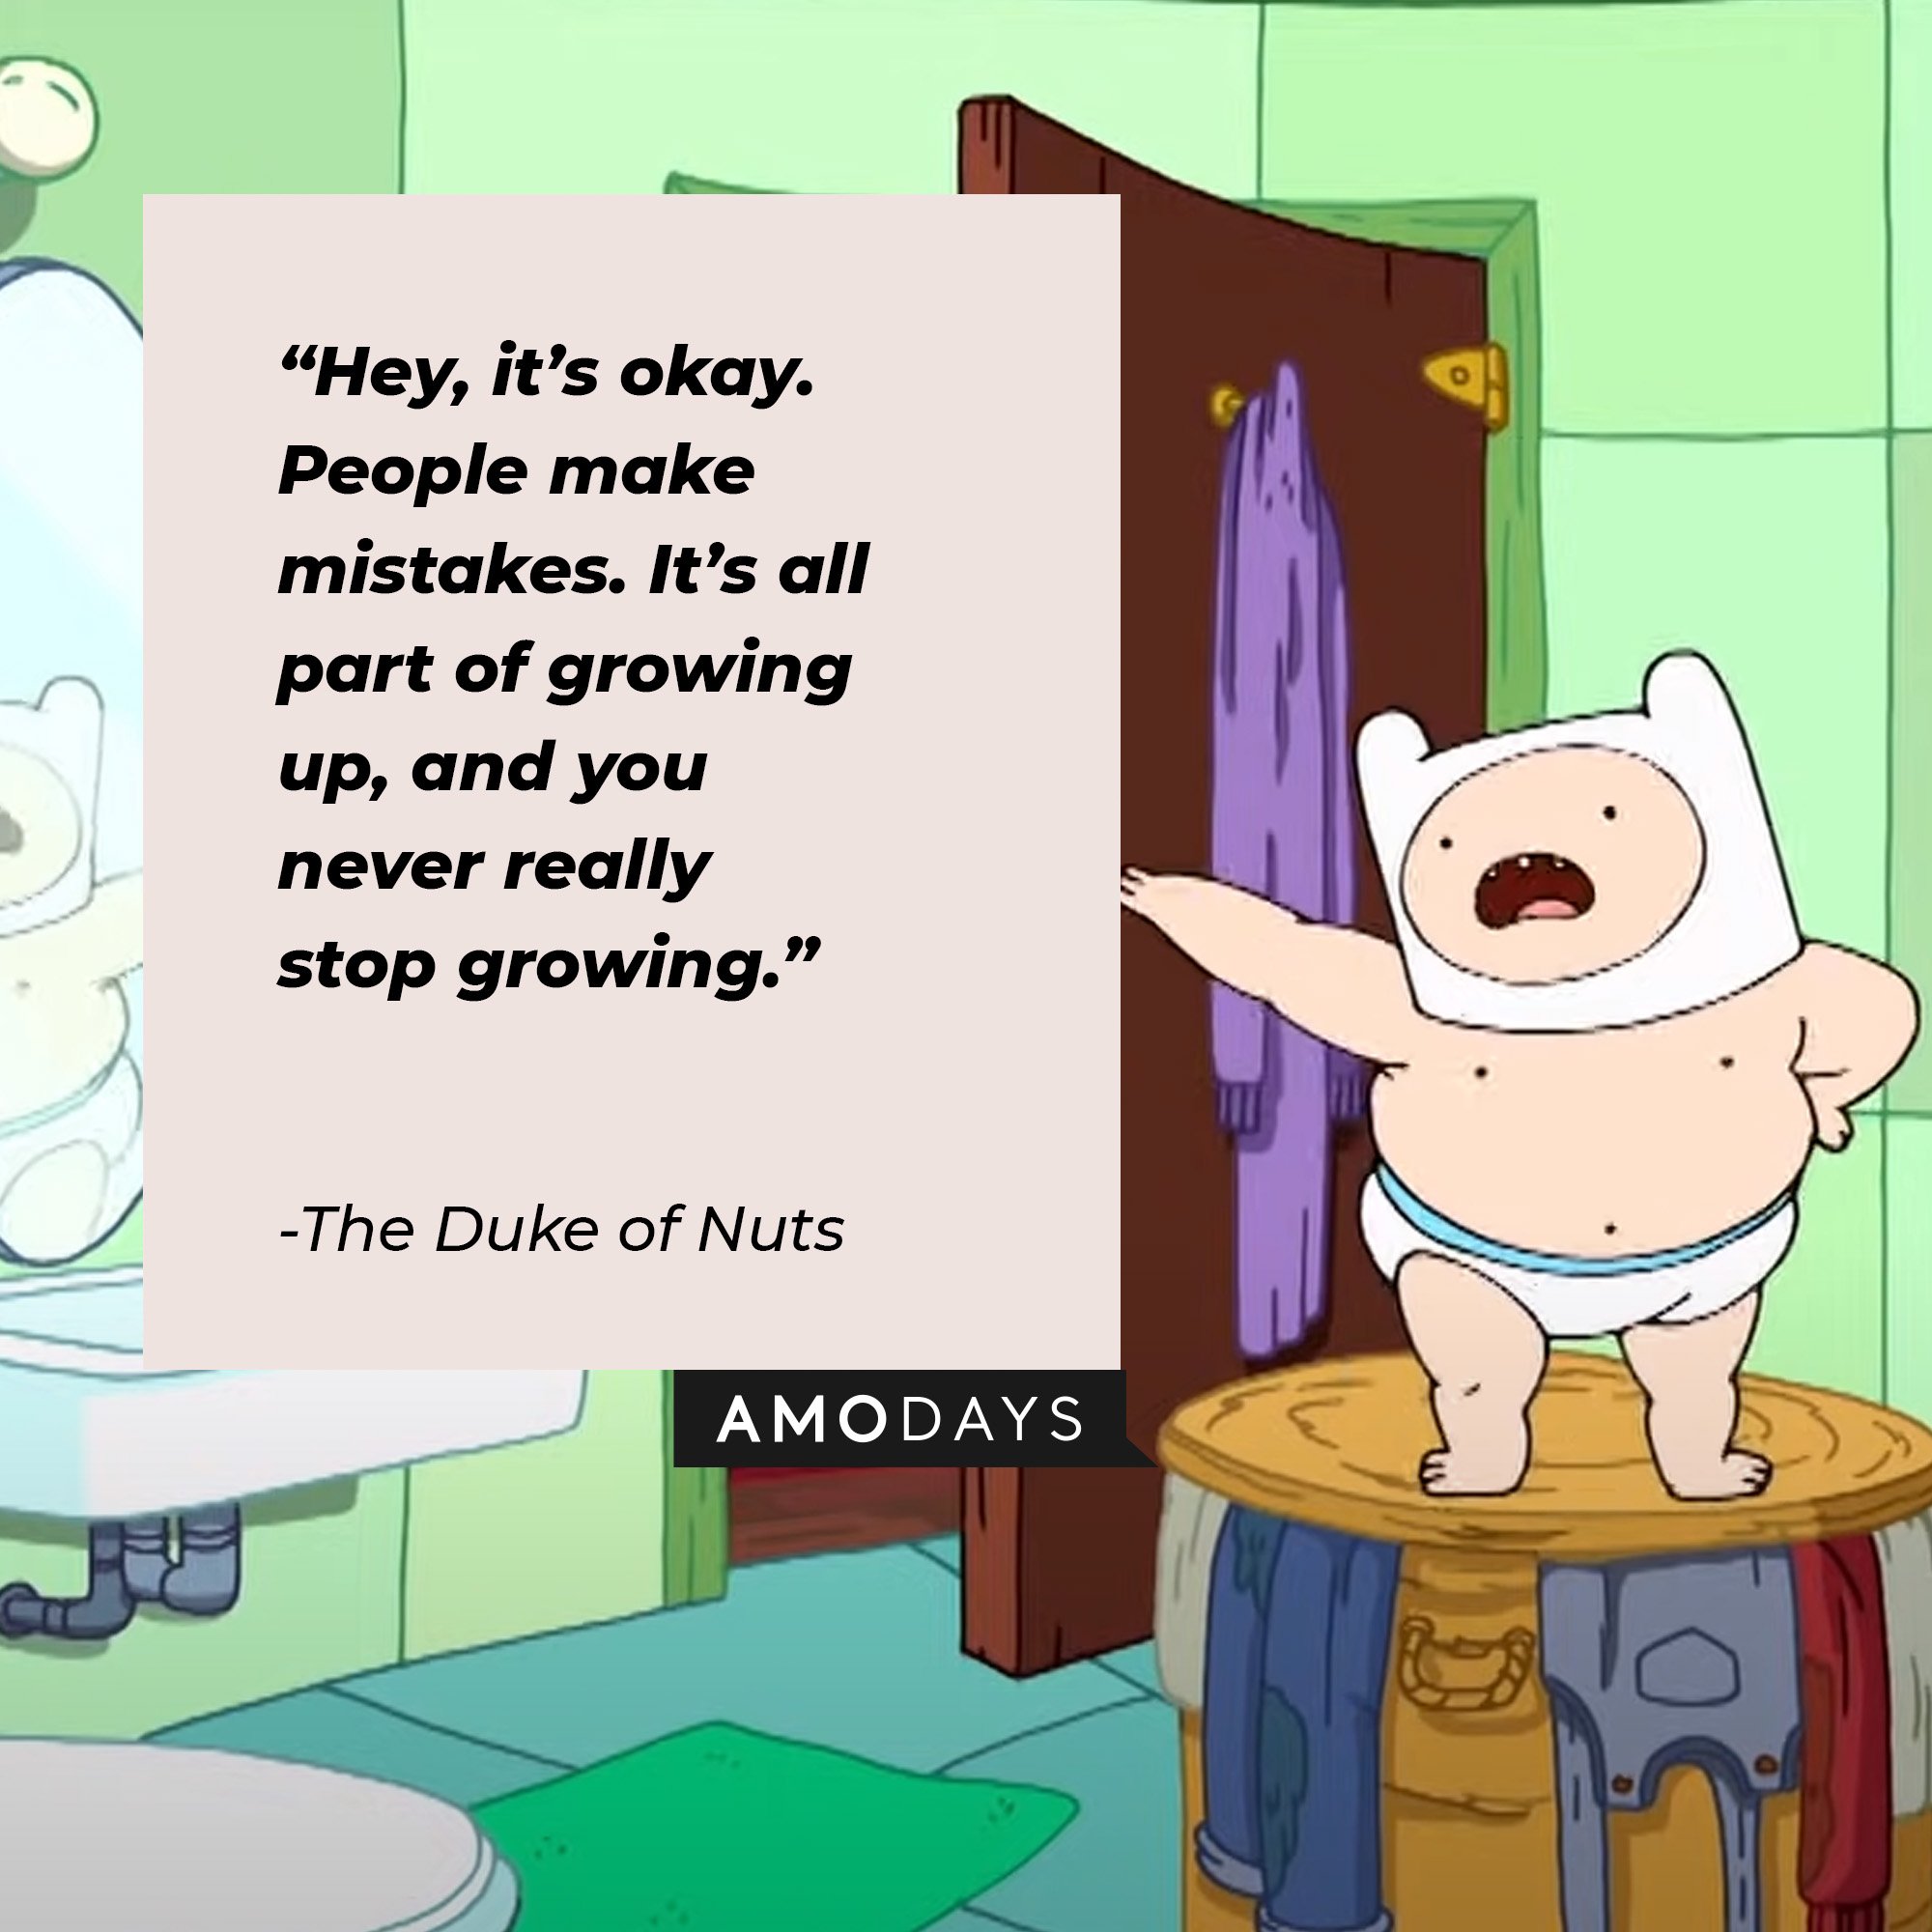 The Duke of Nuts’ quote: “Hey, it’s okay. People make mistakes. It’s all part of growing up, and you never really stop growing.” | Image: AmoDays